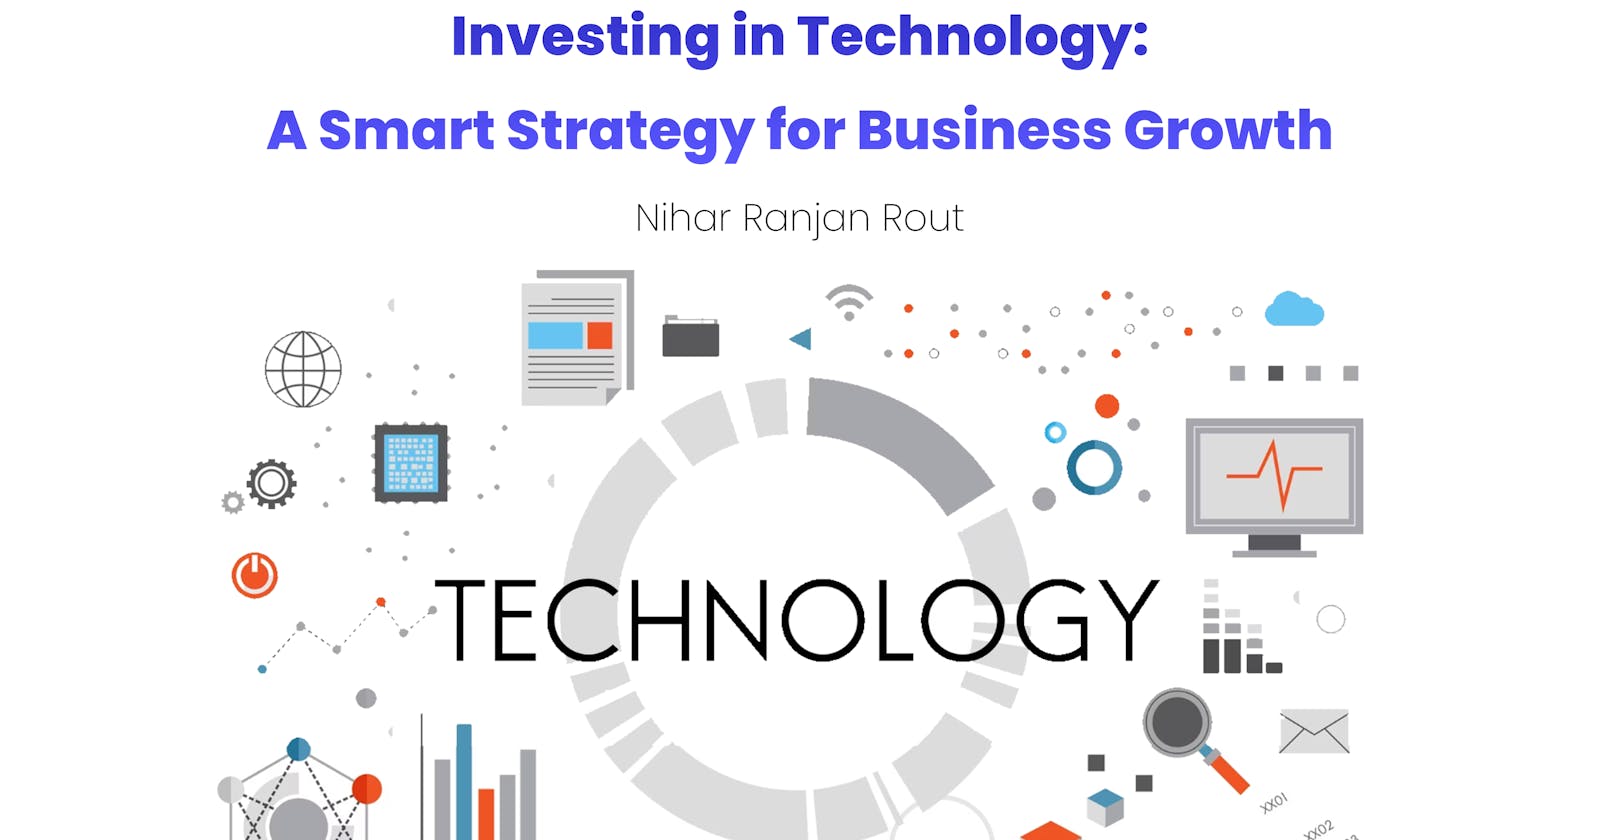 Investing in Technology: A Smart Strategy for Business Growth